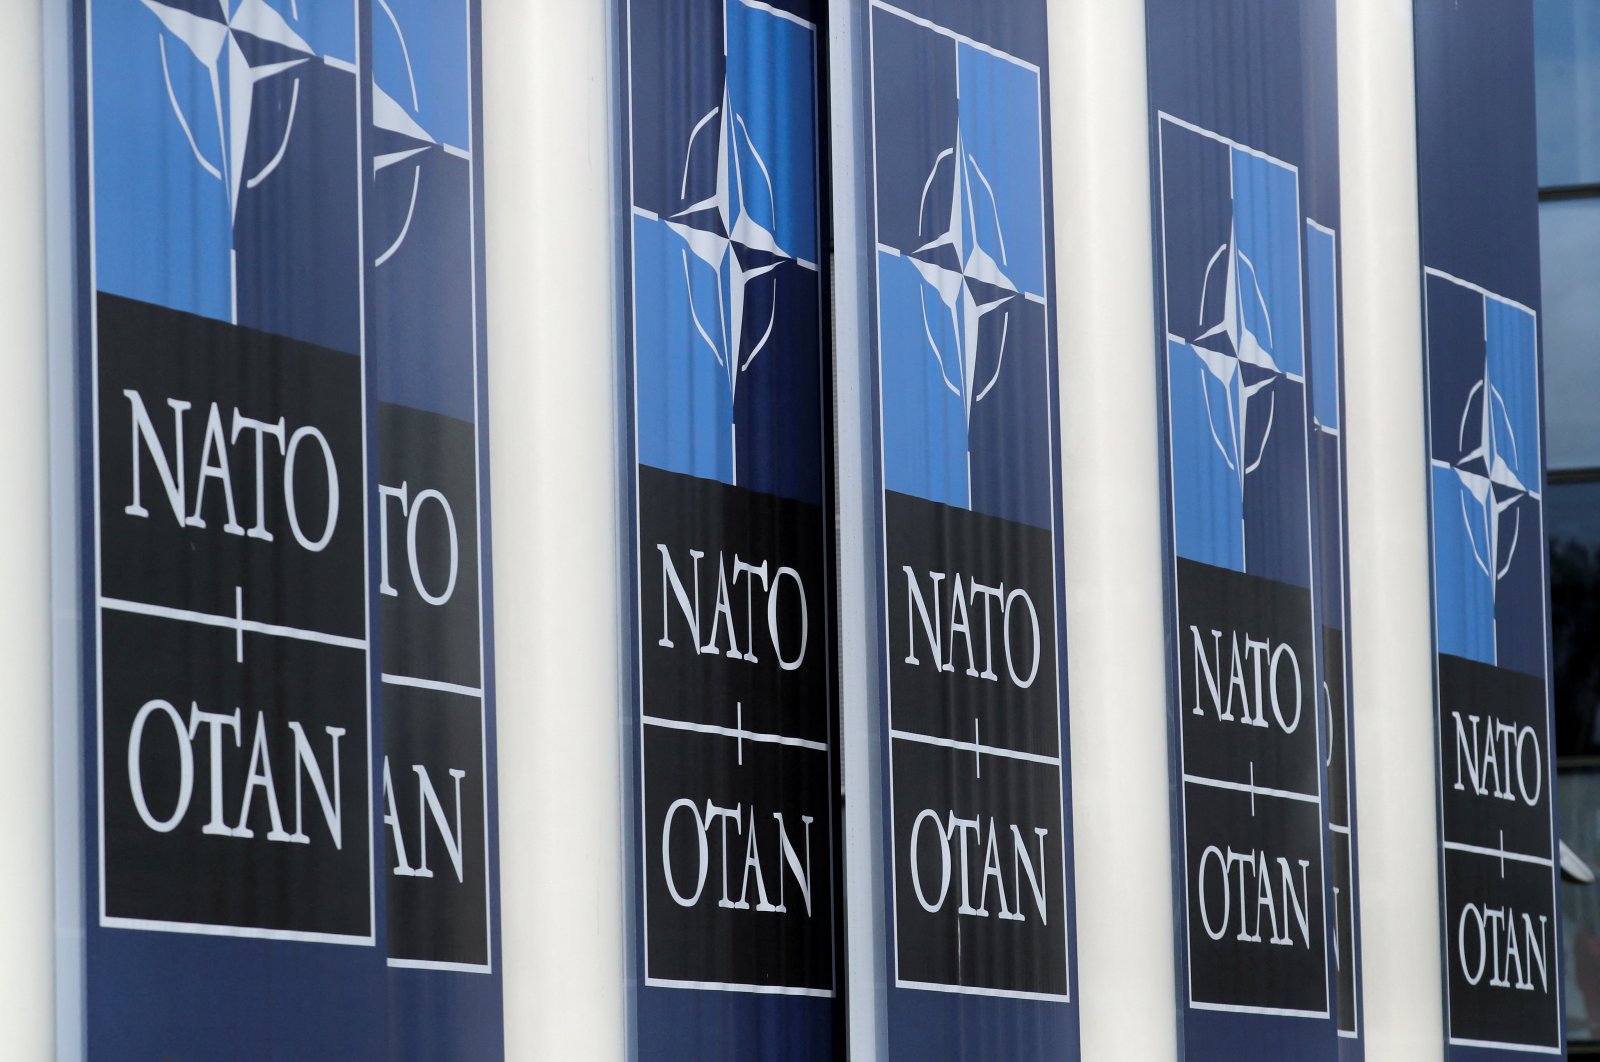 NATO logos are seen at the alliance headquarters ahead of a NATO defense ministers meeting, in Brussels, Belgium, Oct. 21, 2021. (Reuters Photo)